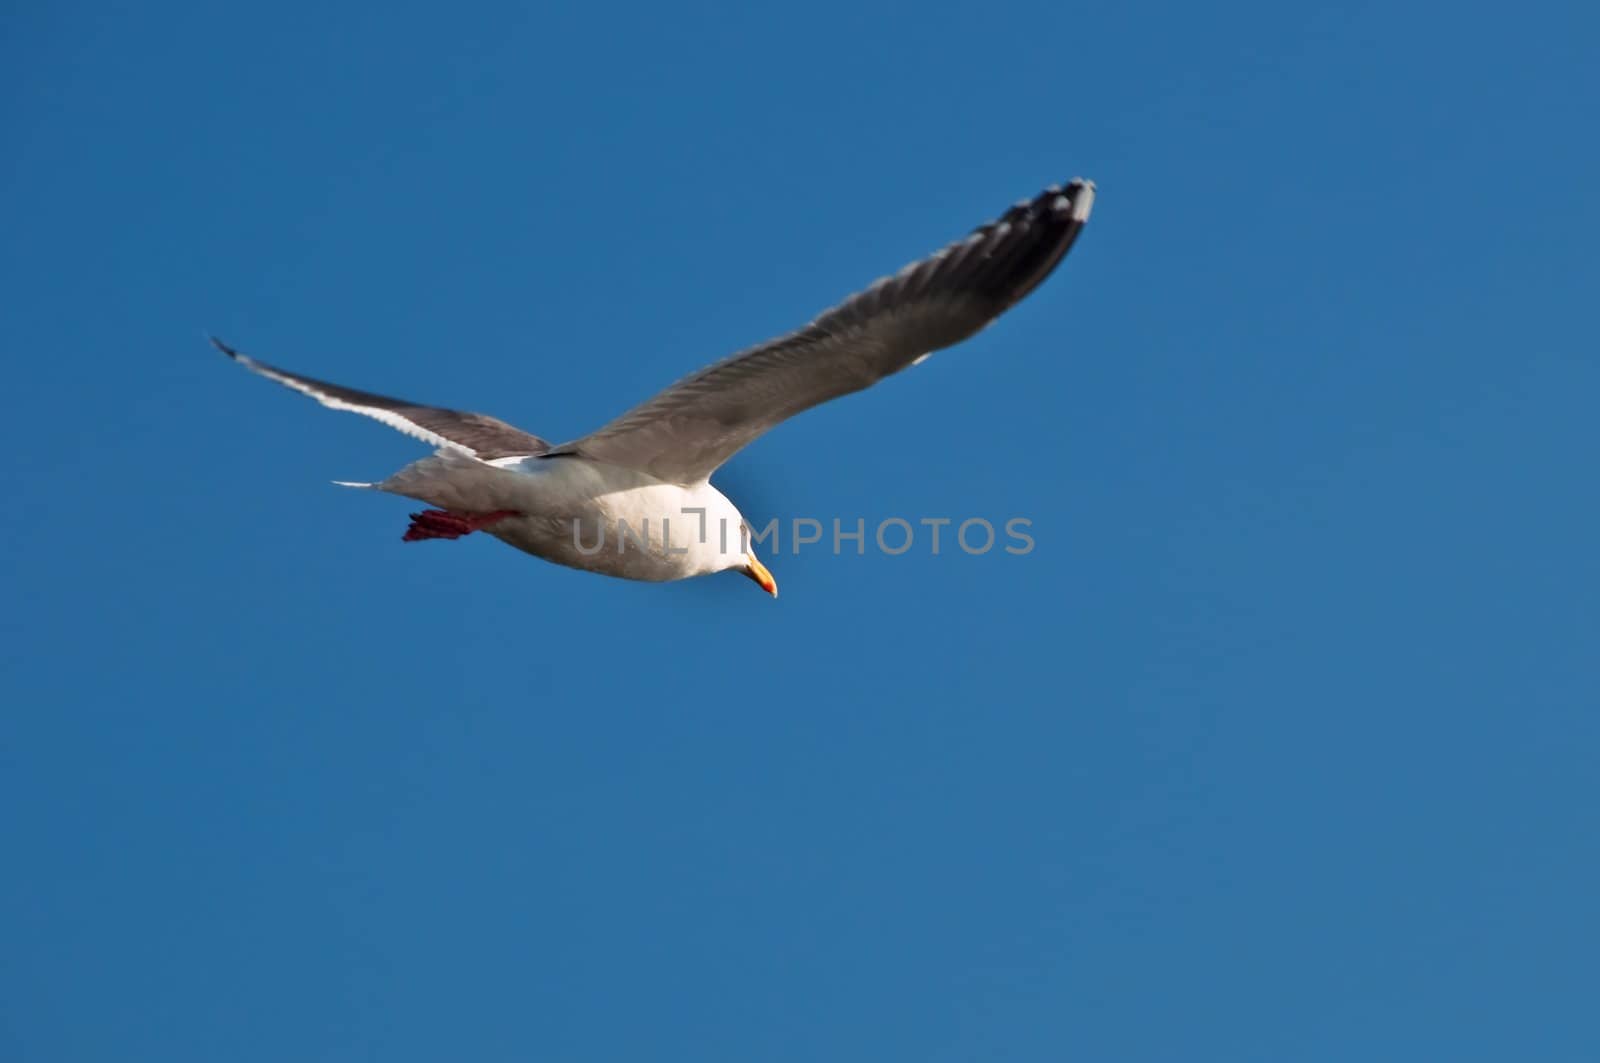 A seagull is gliding at the blue sky